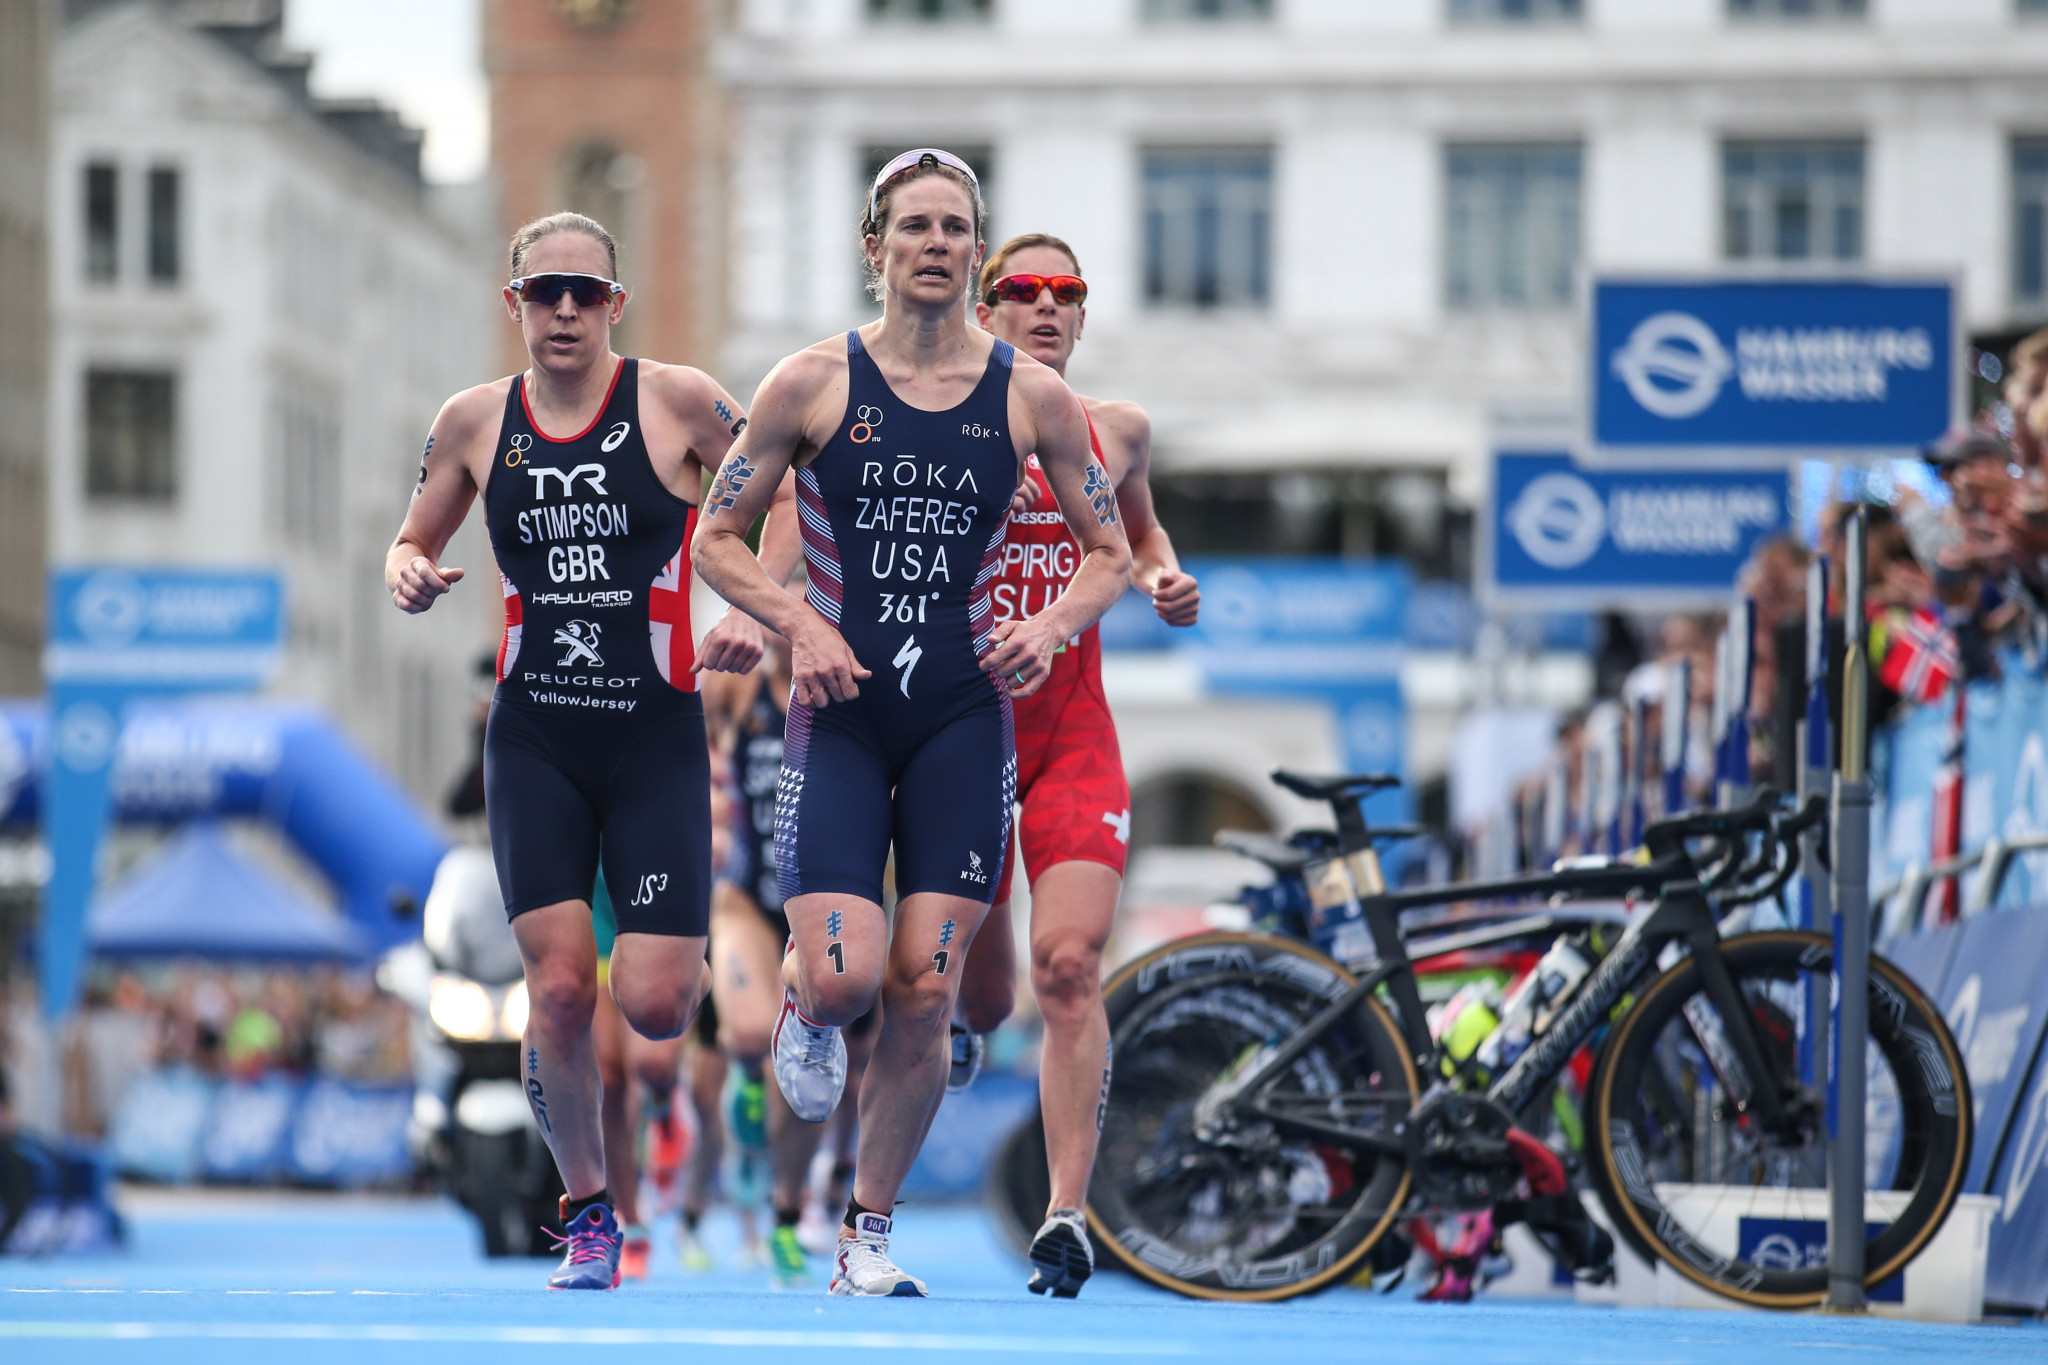 How Can You Qualify For The Olympics In Triathlon